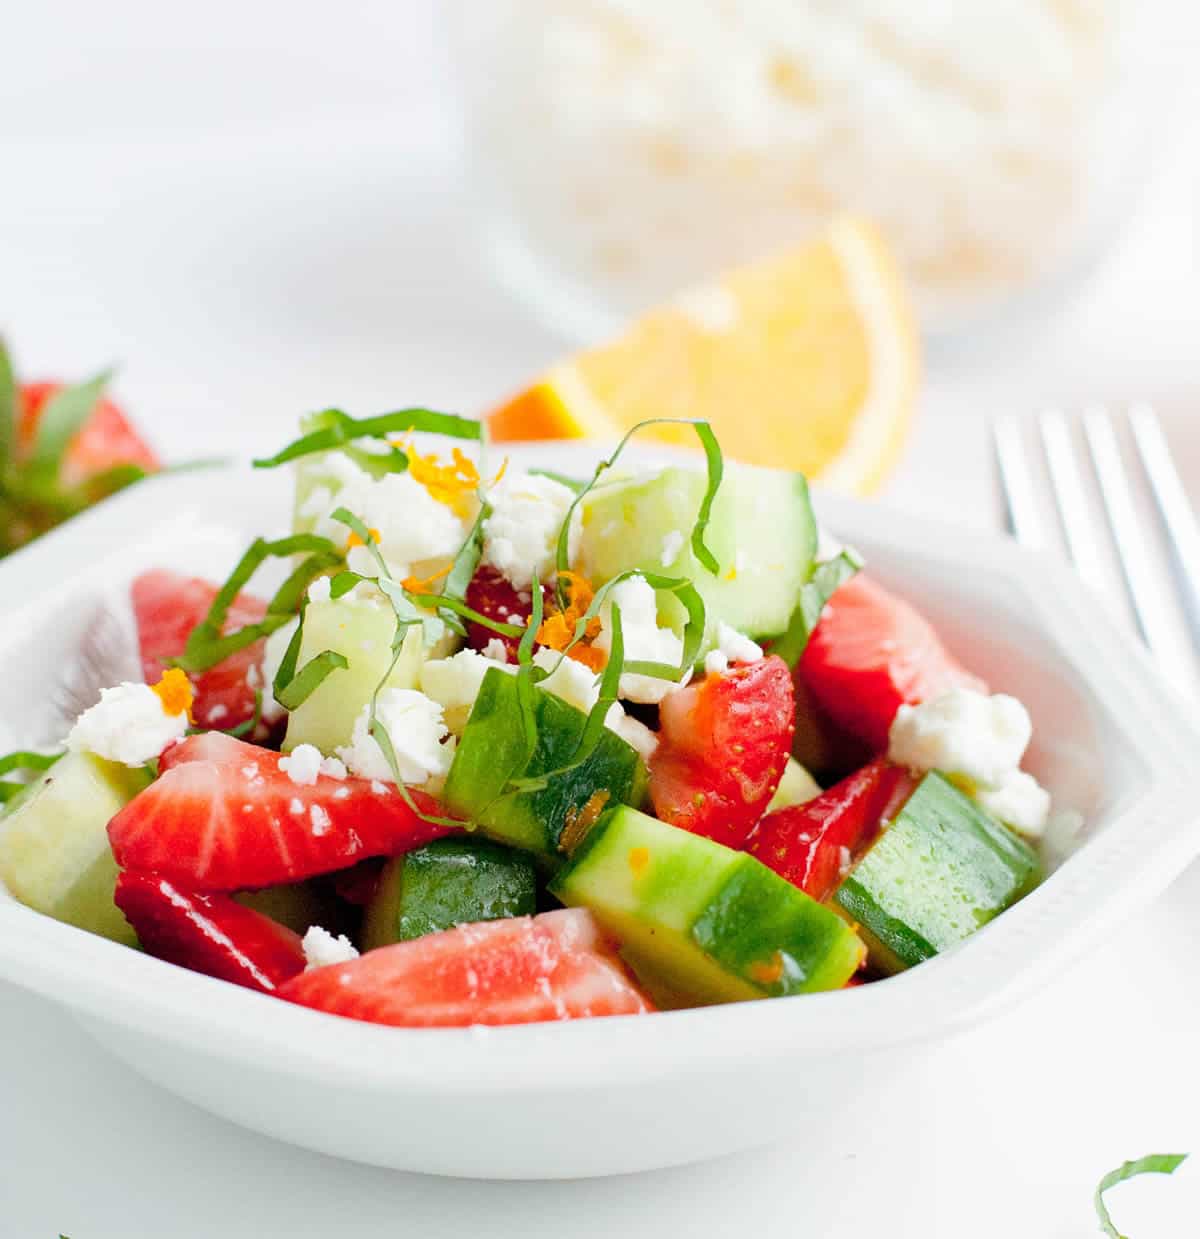 Strawberry Cucumber Salad-Fresh, sweet strawberries, crunchy cucumbers, zesty orange and briny feta. This is an easy salad to adapt to whatever fruit, cheese or veggies you may have on hand. Just mix them up and toss with the orange vinaigrette and you've got yourself one refreshing salad!